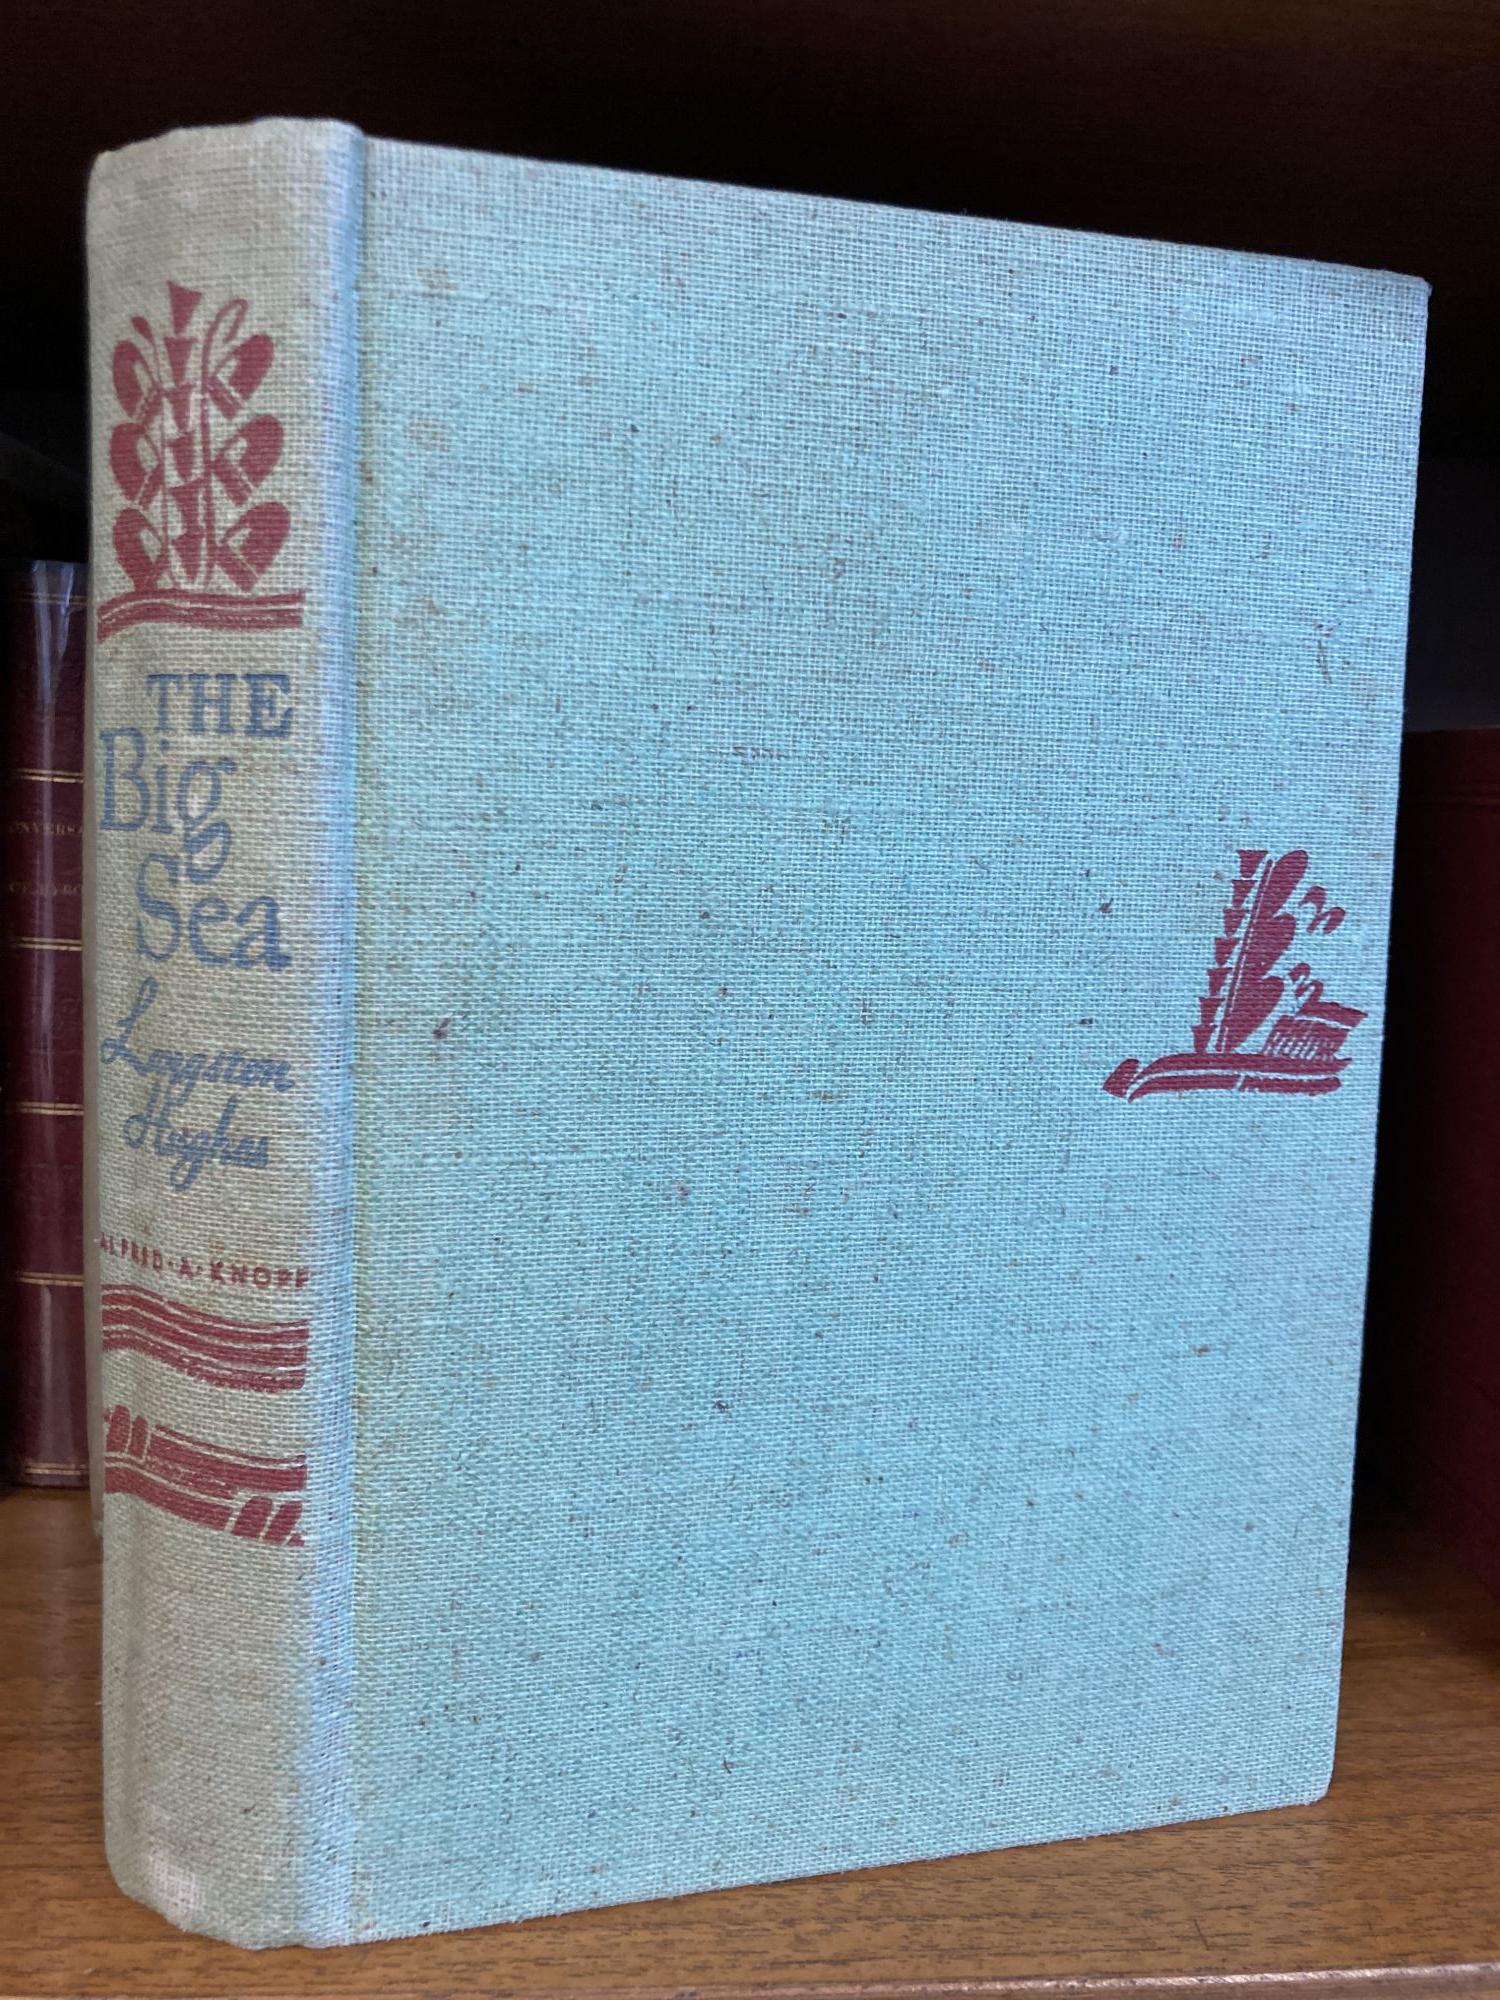 THE BIG SEA by Hughes, Langston: Hardcover (1940) First Edition, First ...